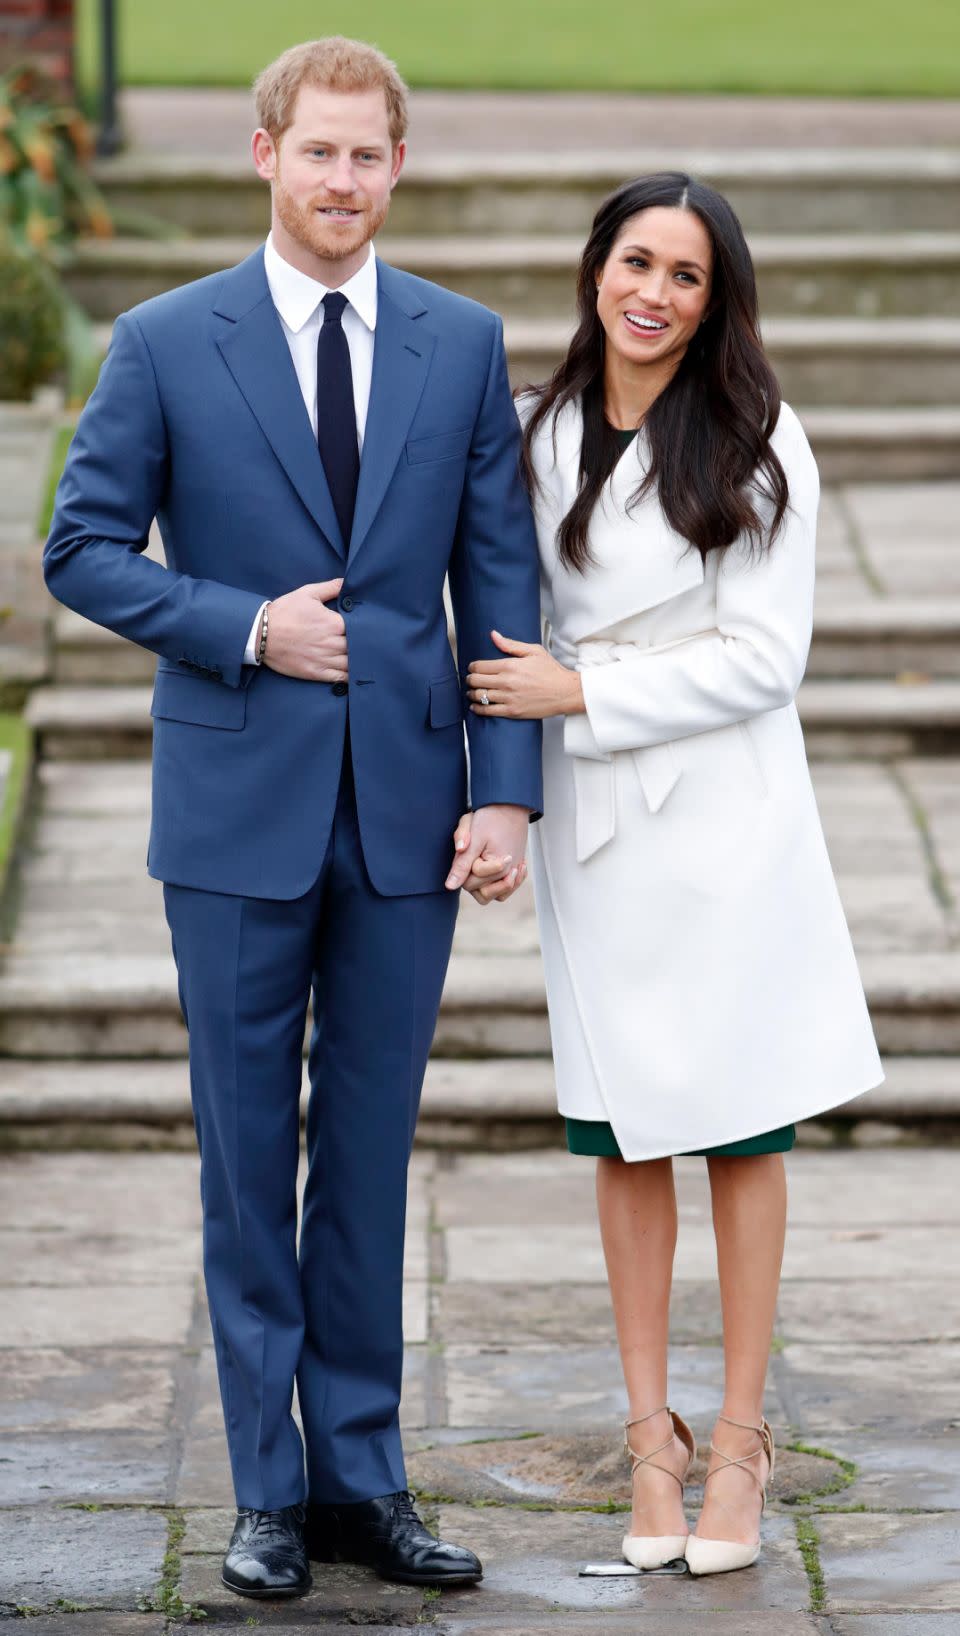 Prince Harry and Meghan Markle have revealed more details about the royal wedding. Photo: Getty Images